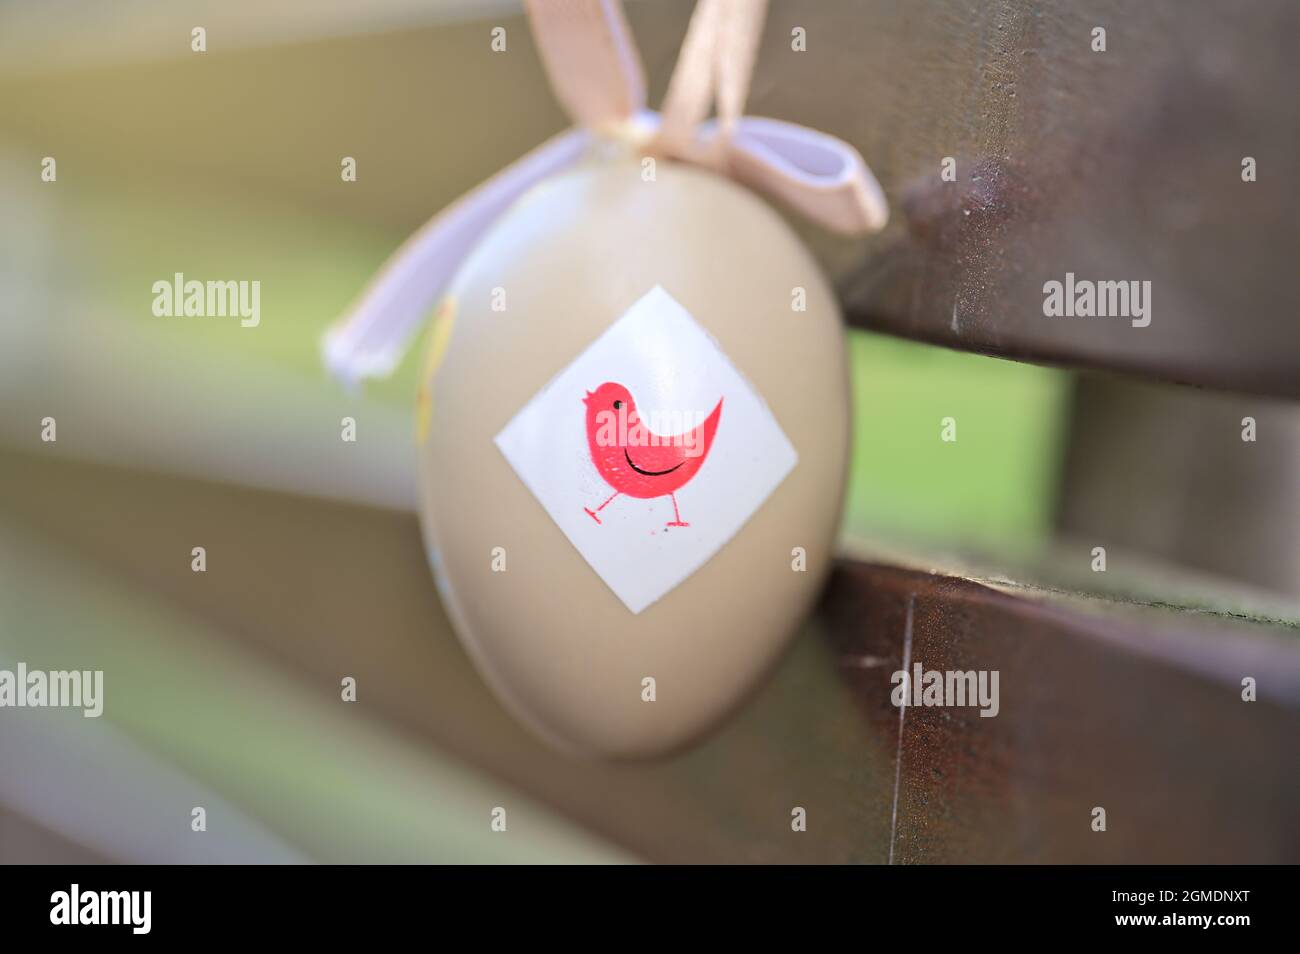 Closeup view of light beige plastic decorative Easter egg tied with ribbon on dark brown bench at university campus, Belfield, Dublin Ireland Stock Photo